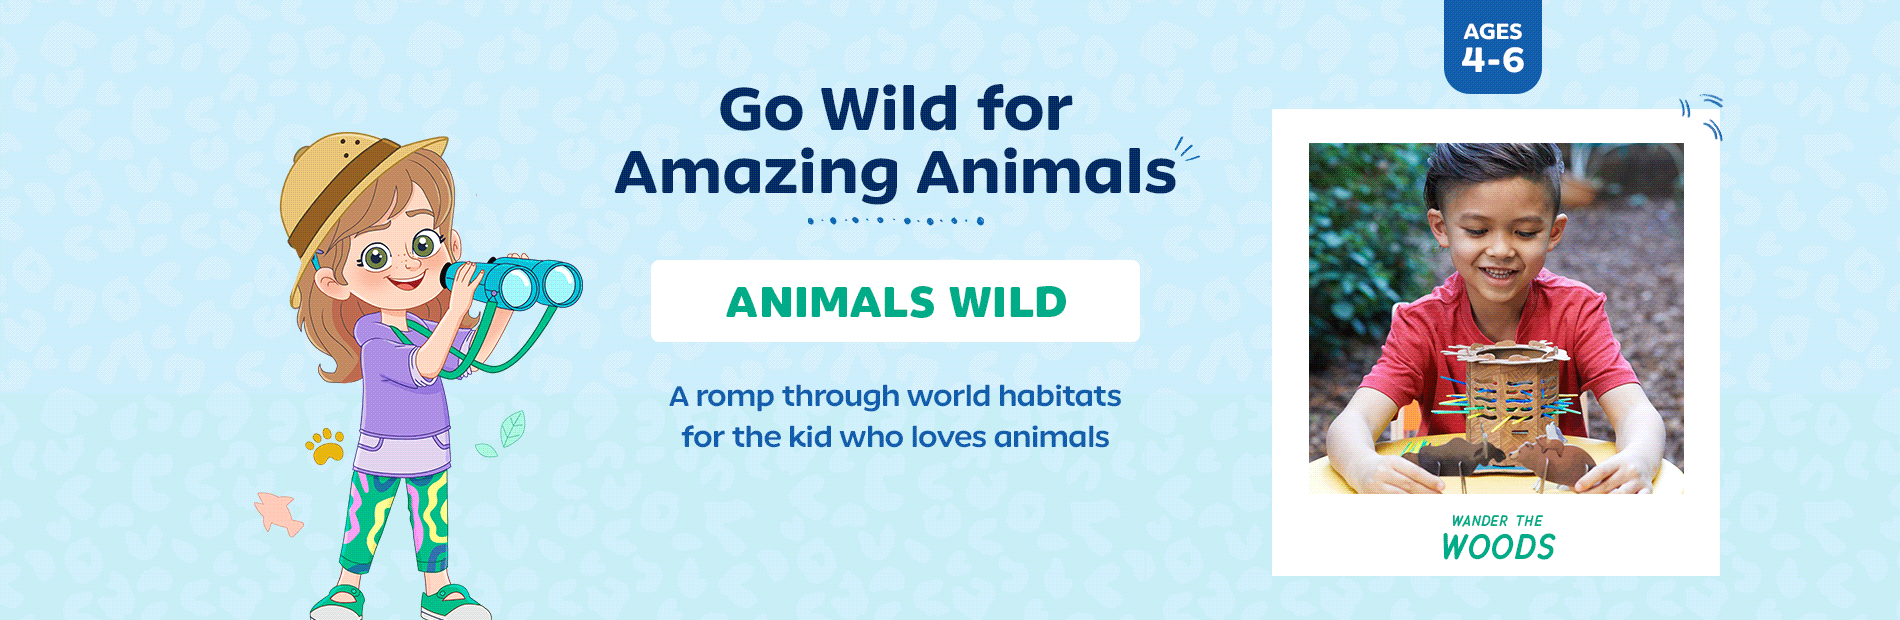 Go Wild for Amazing Animals. Animals Wild. A romp through world habitats for the kid who loves animals. Ages 4-6.